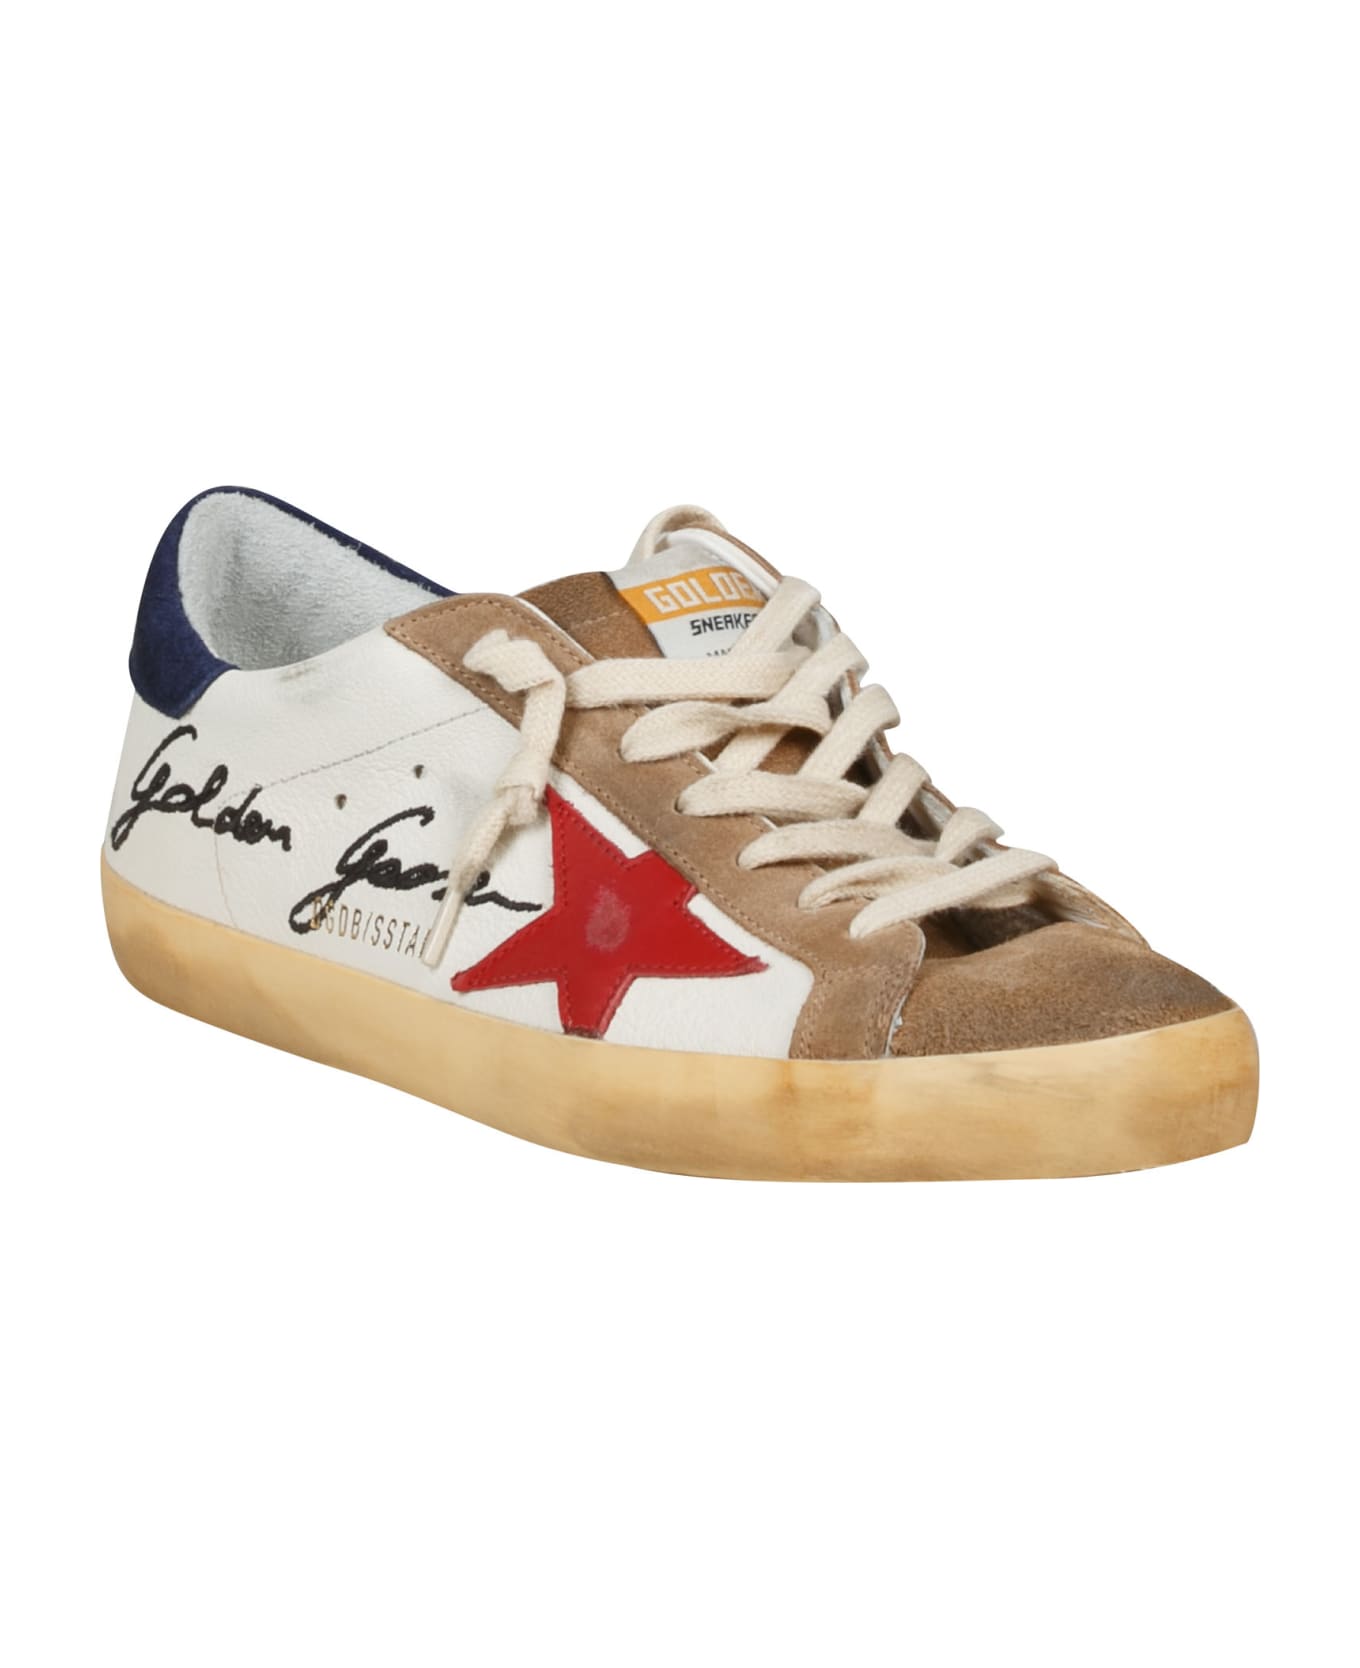 Golden Goose Super-star Classic Sneakers - White/Red